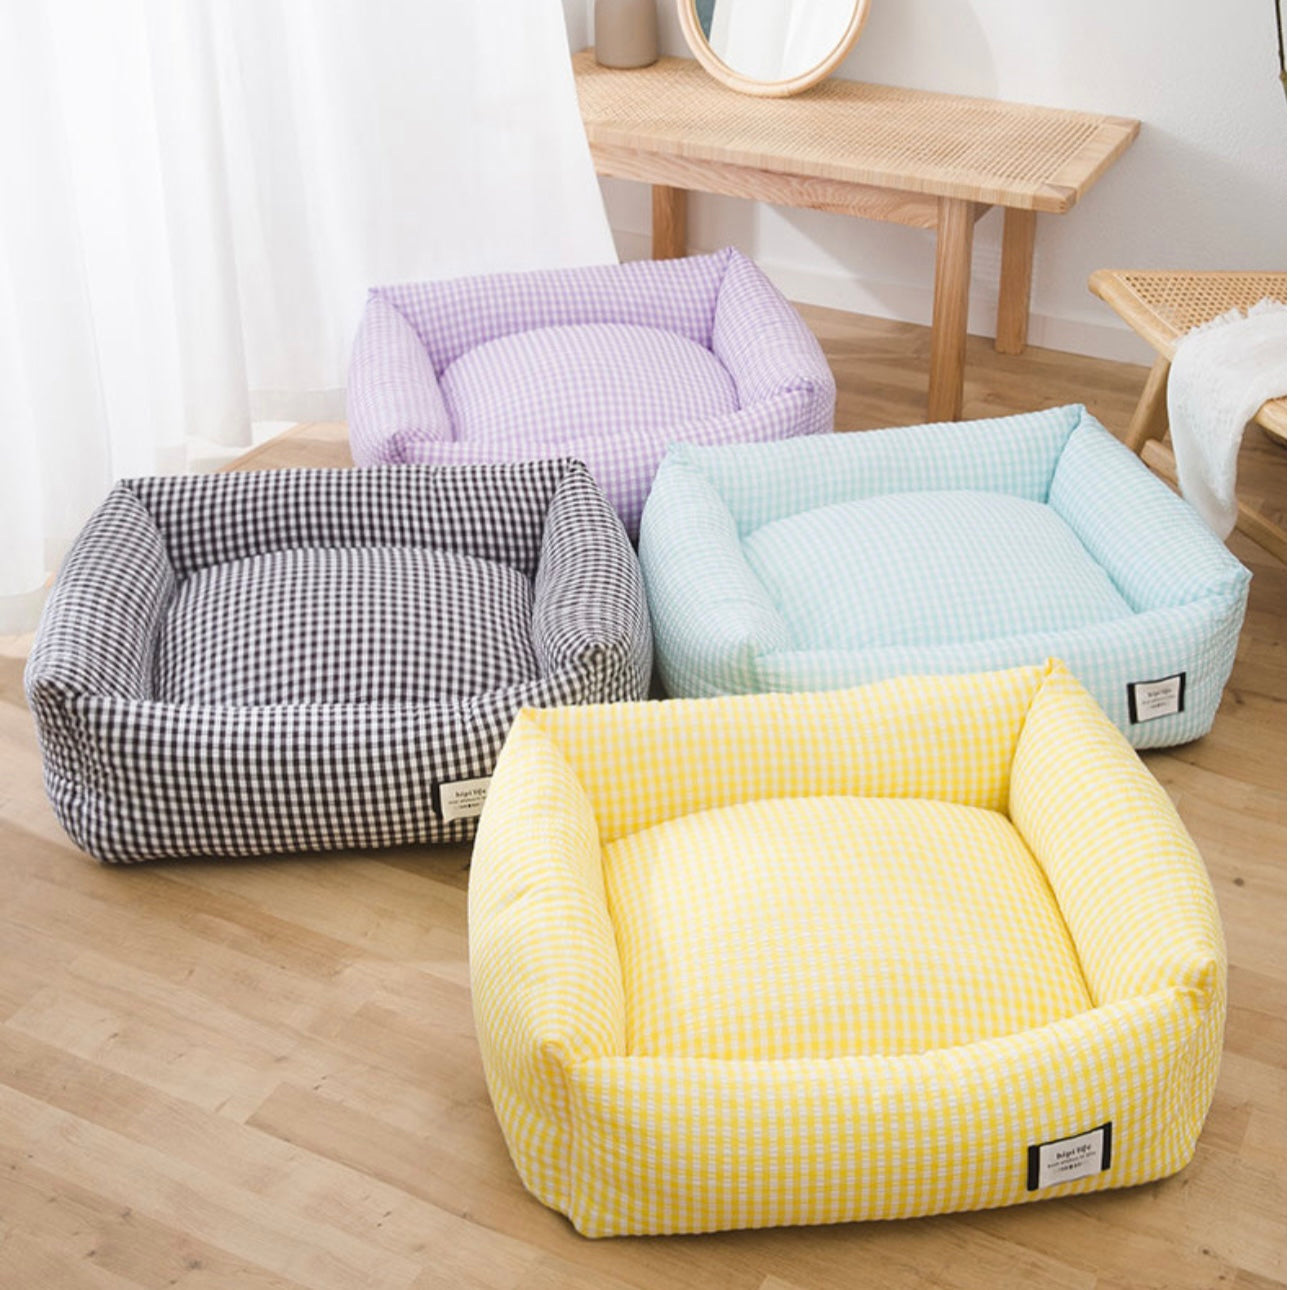 Cute color bed for cats and small dogs